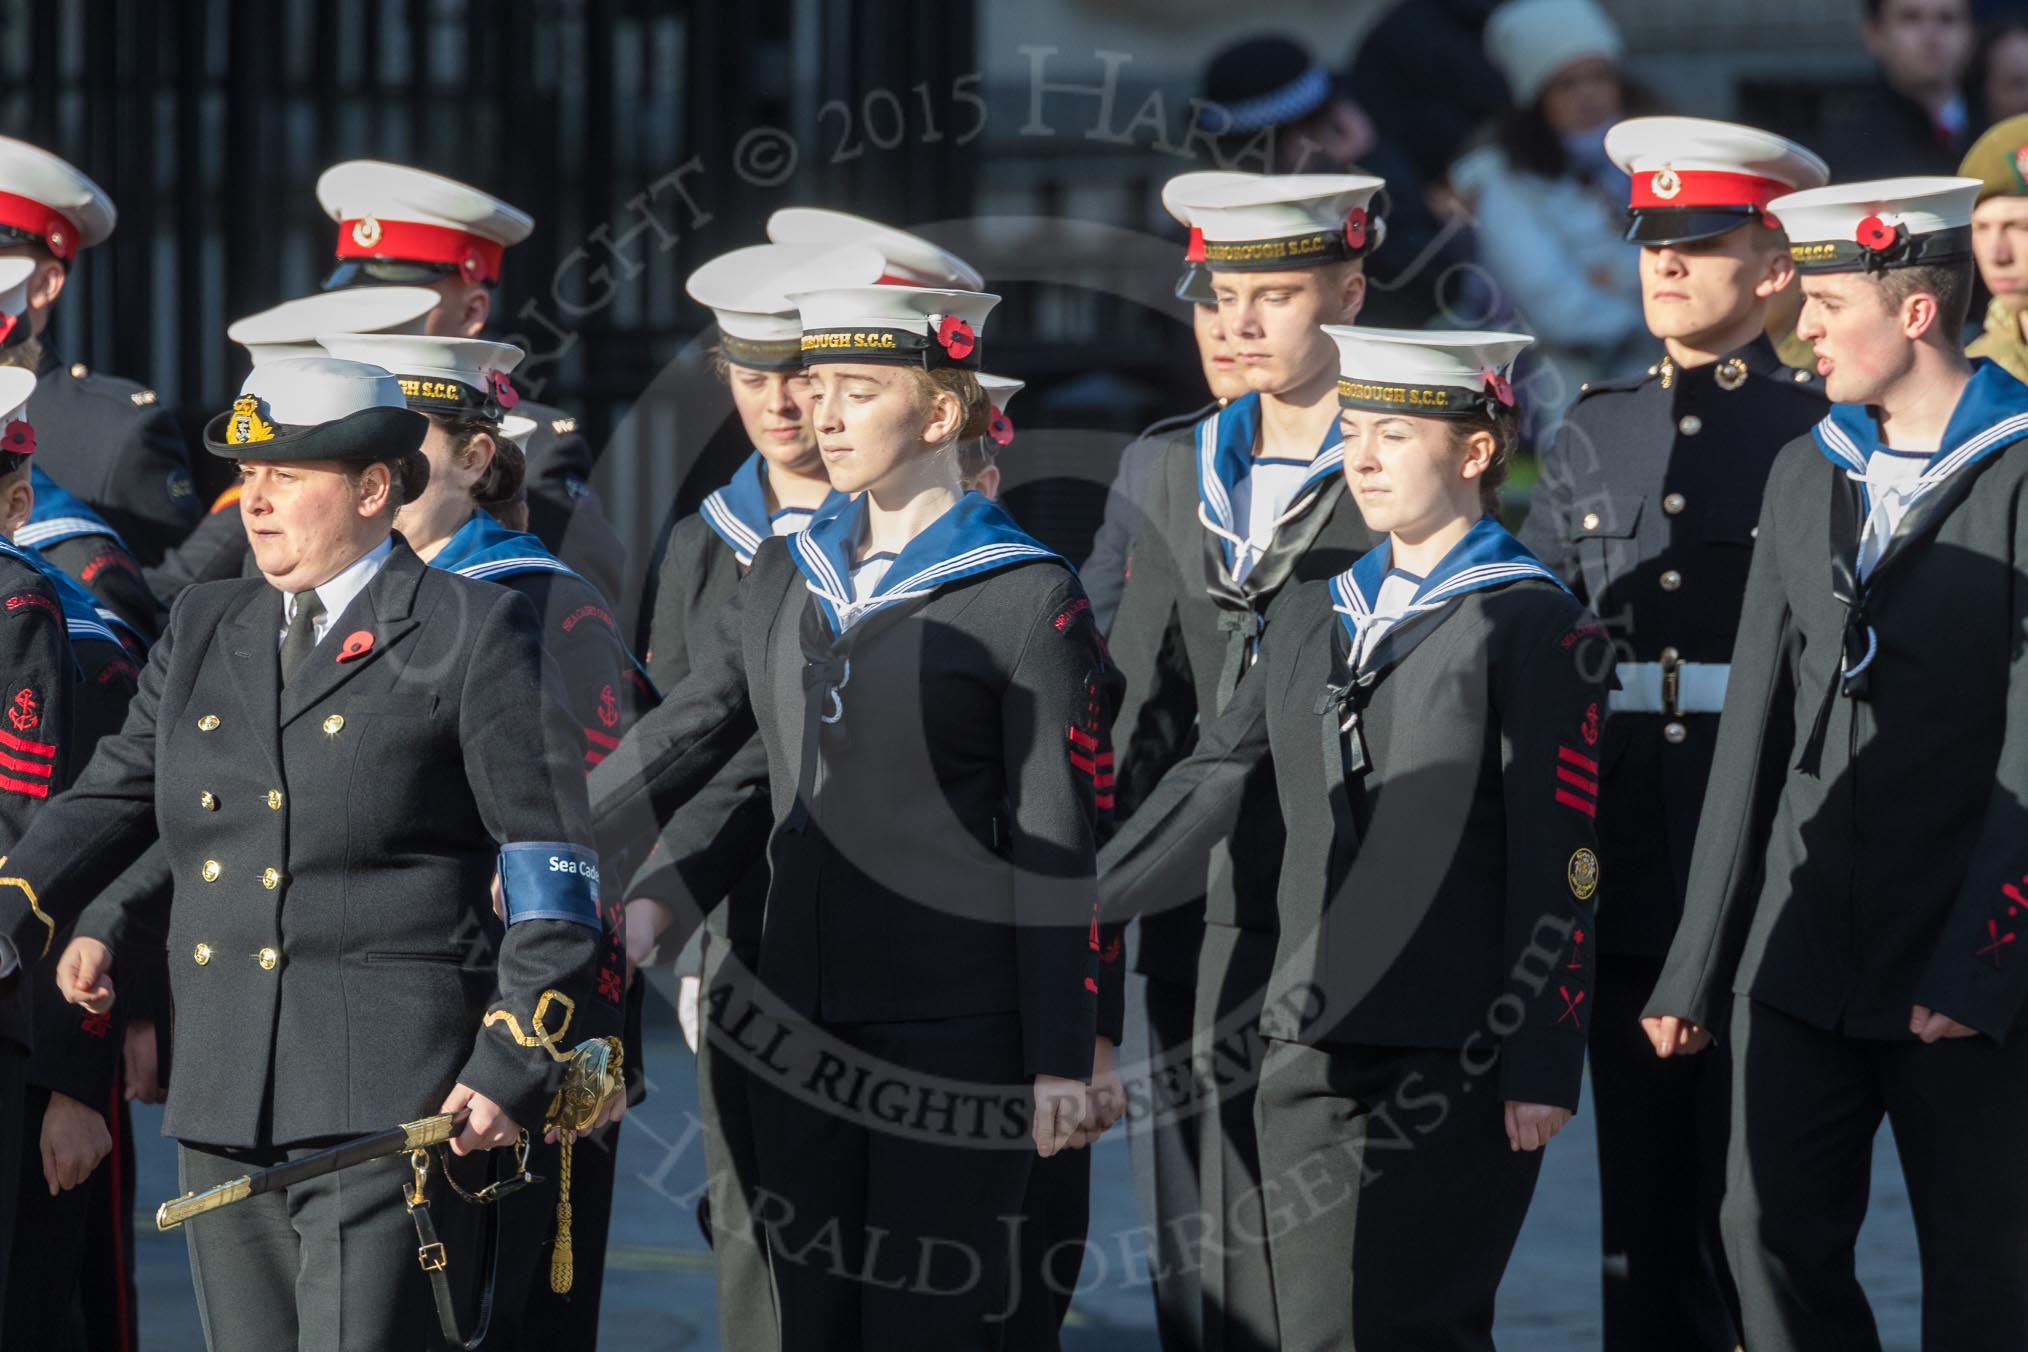 March Past, Remembrance Sunday at the Cenotaph 2016: M32 Army and combined Cadet Force.
Cenotaph, Whitehall, London SW1,
London,
Greater London,
United Kingdom,
on 13 November 2016 at 13:17, image #2793